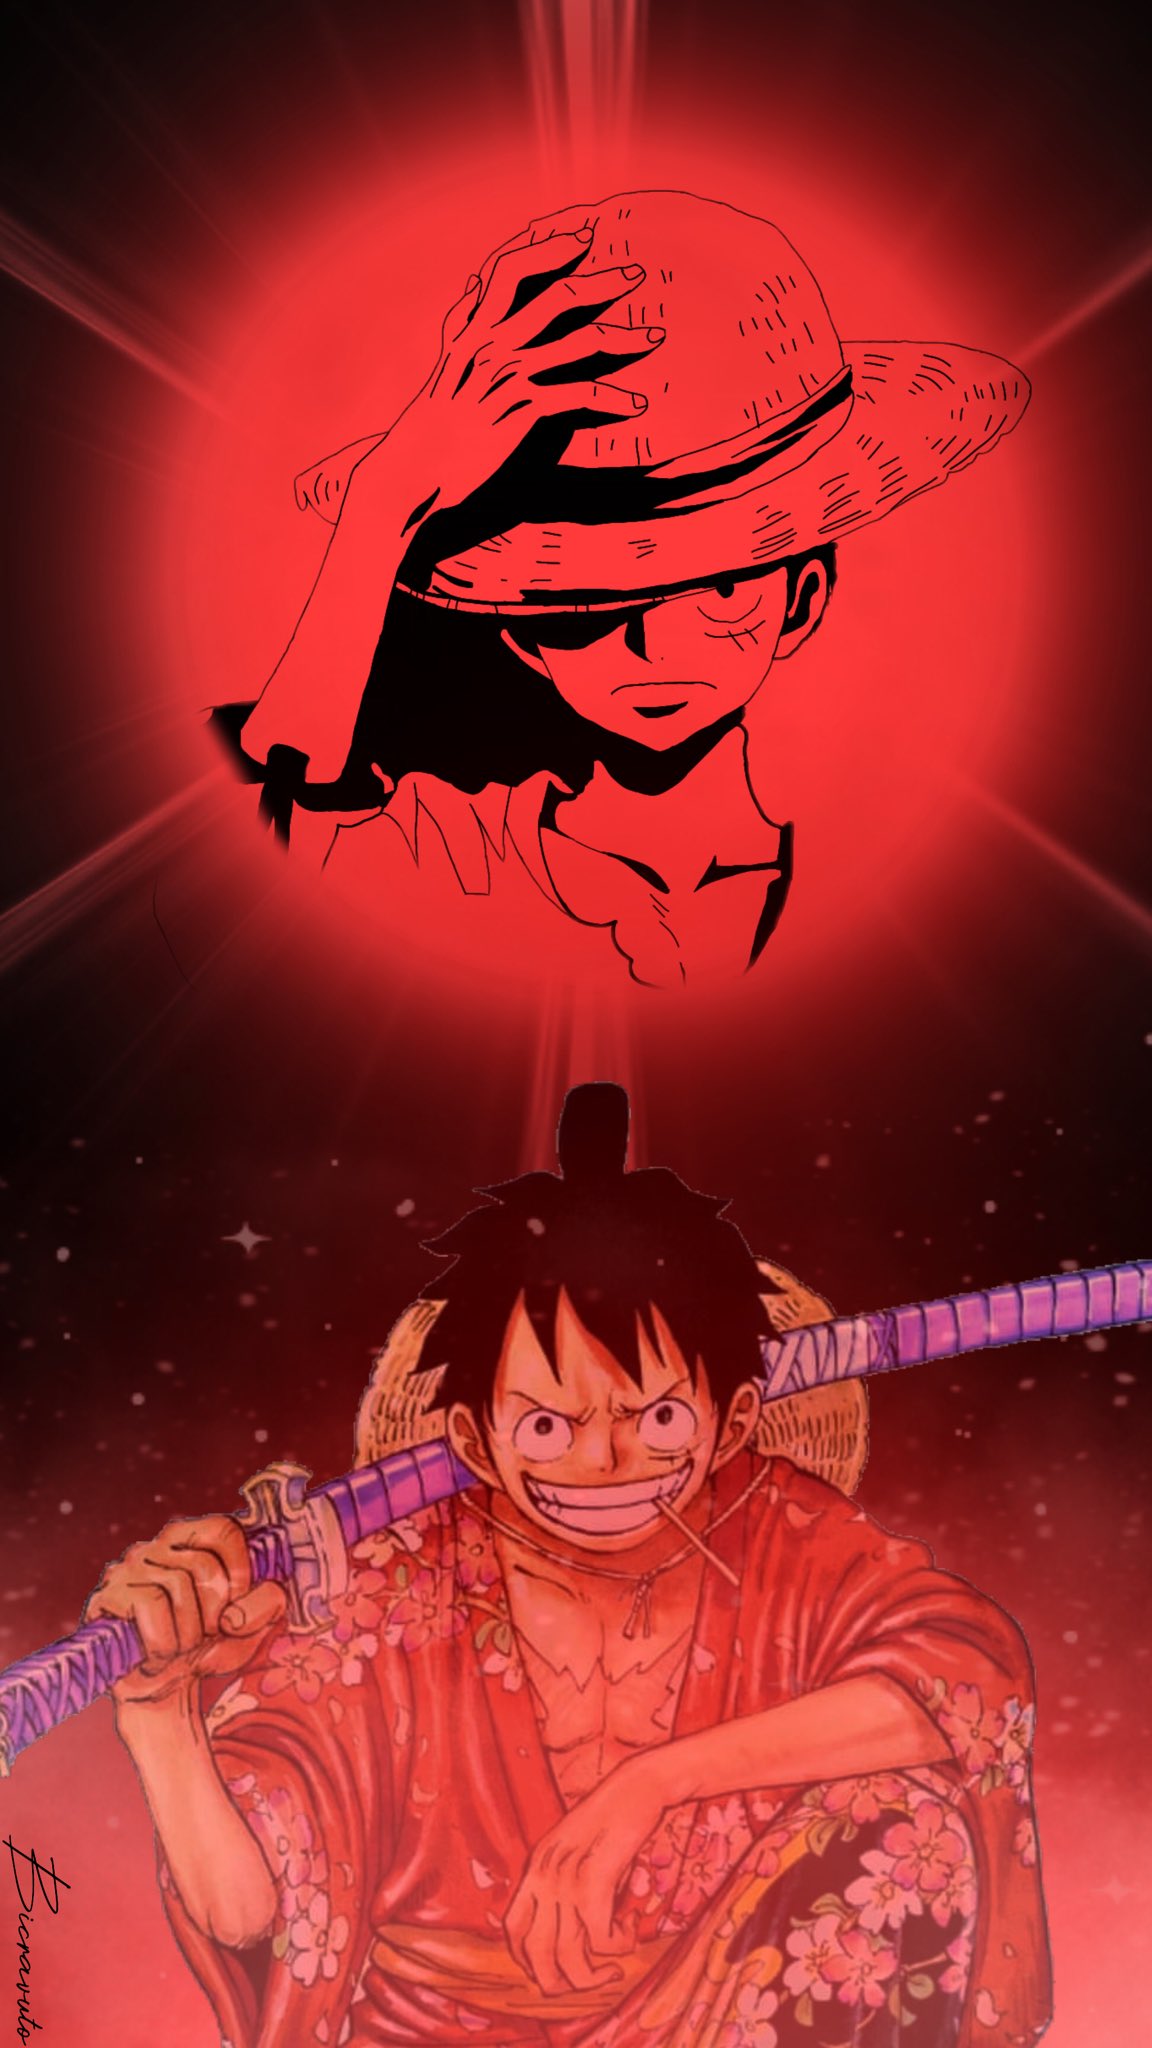 Mobile wallpaper: Anime, One Piece, Monkey D Luffy, Shanks (One Piece),  1094451 download the picture for free.